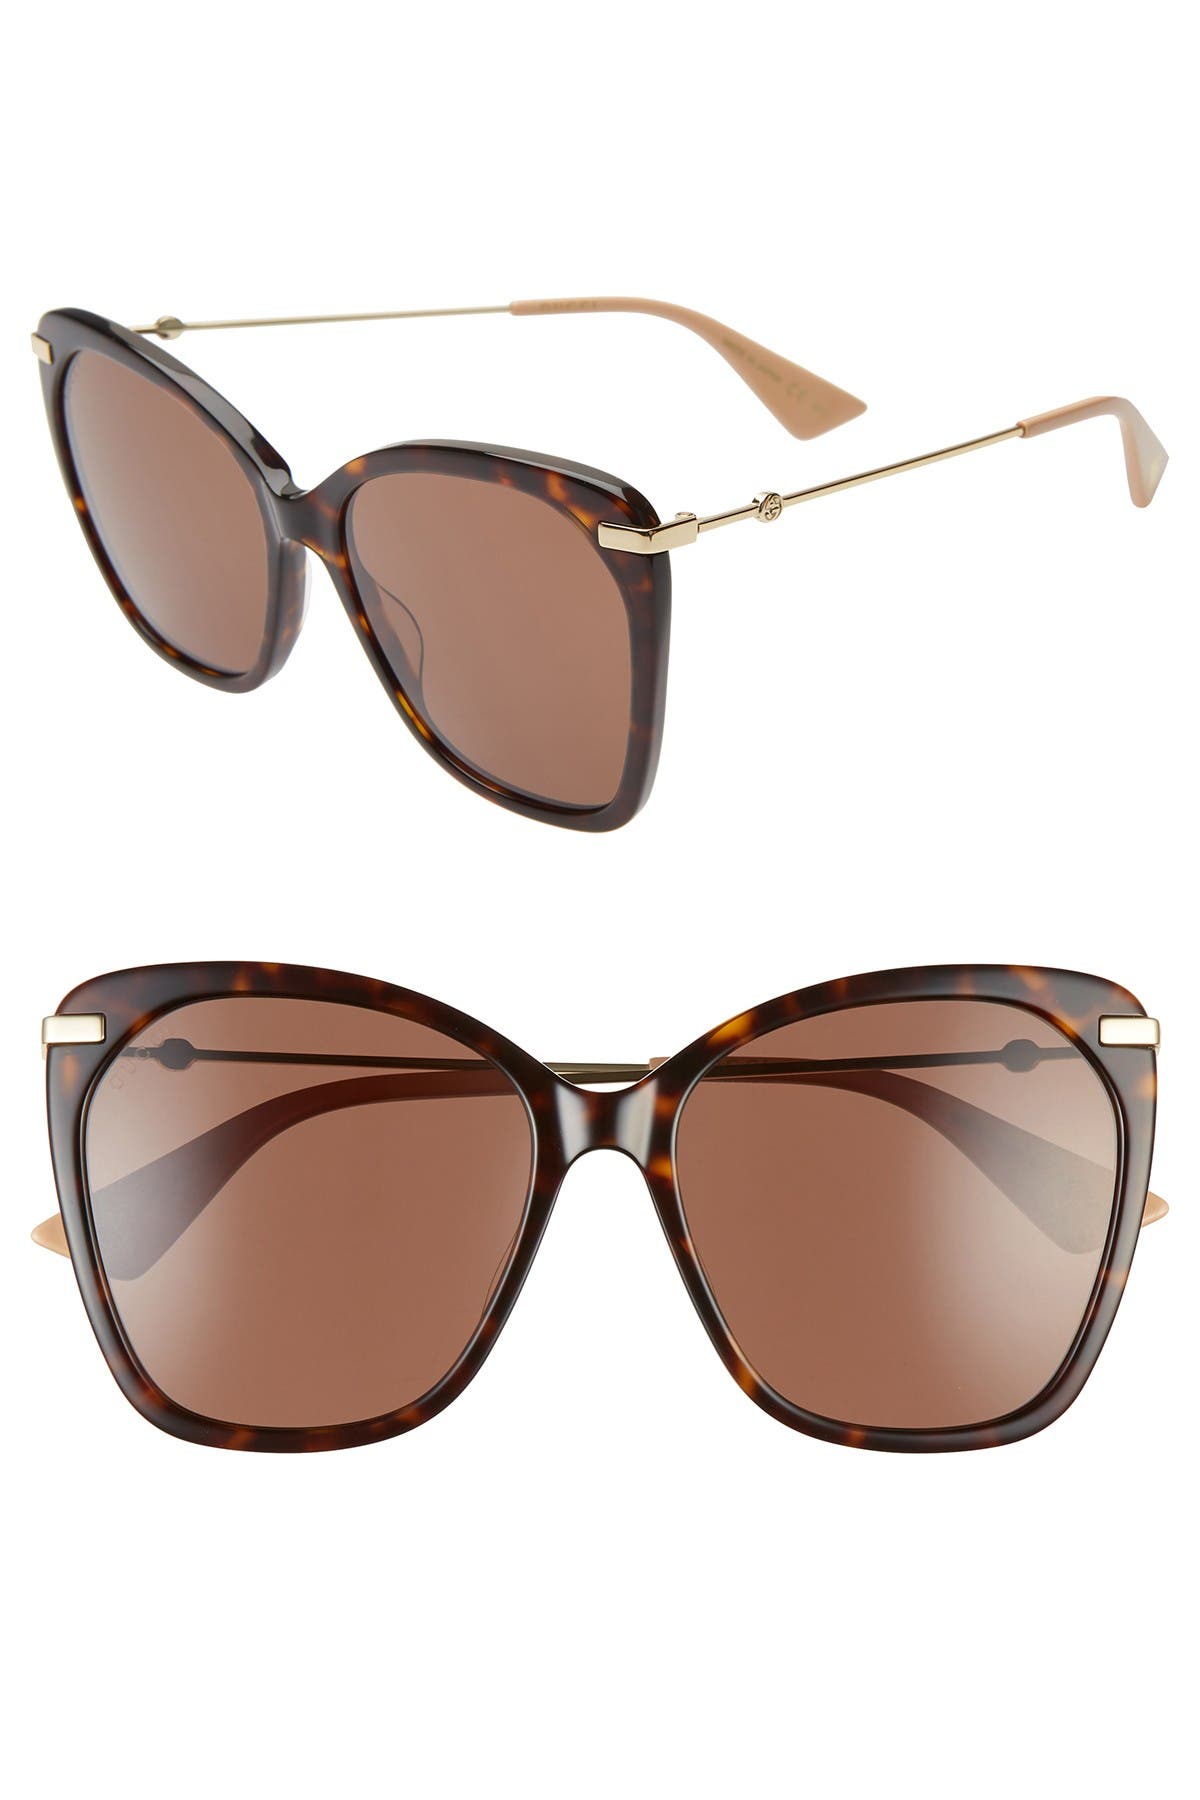 gucci butterfly sunglasses